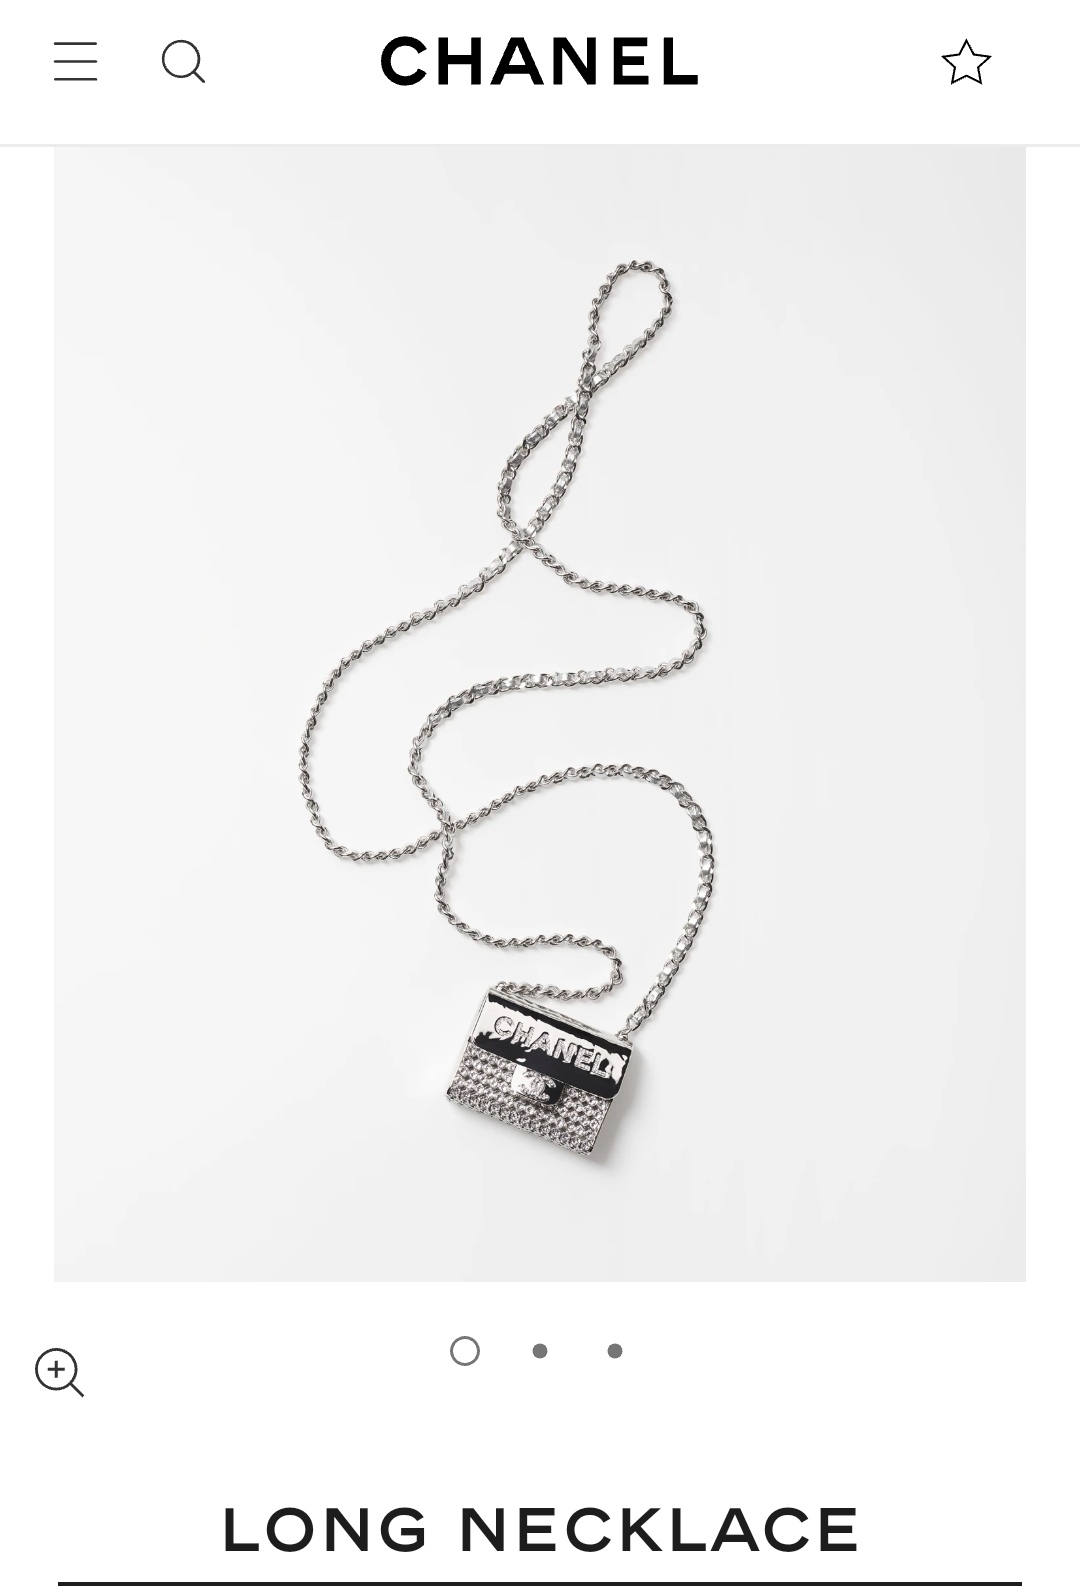 Chanel airpod necklace